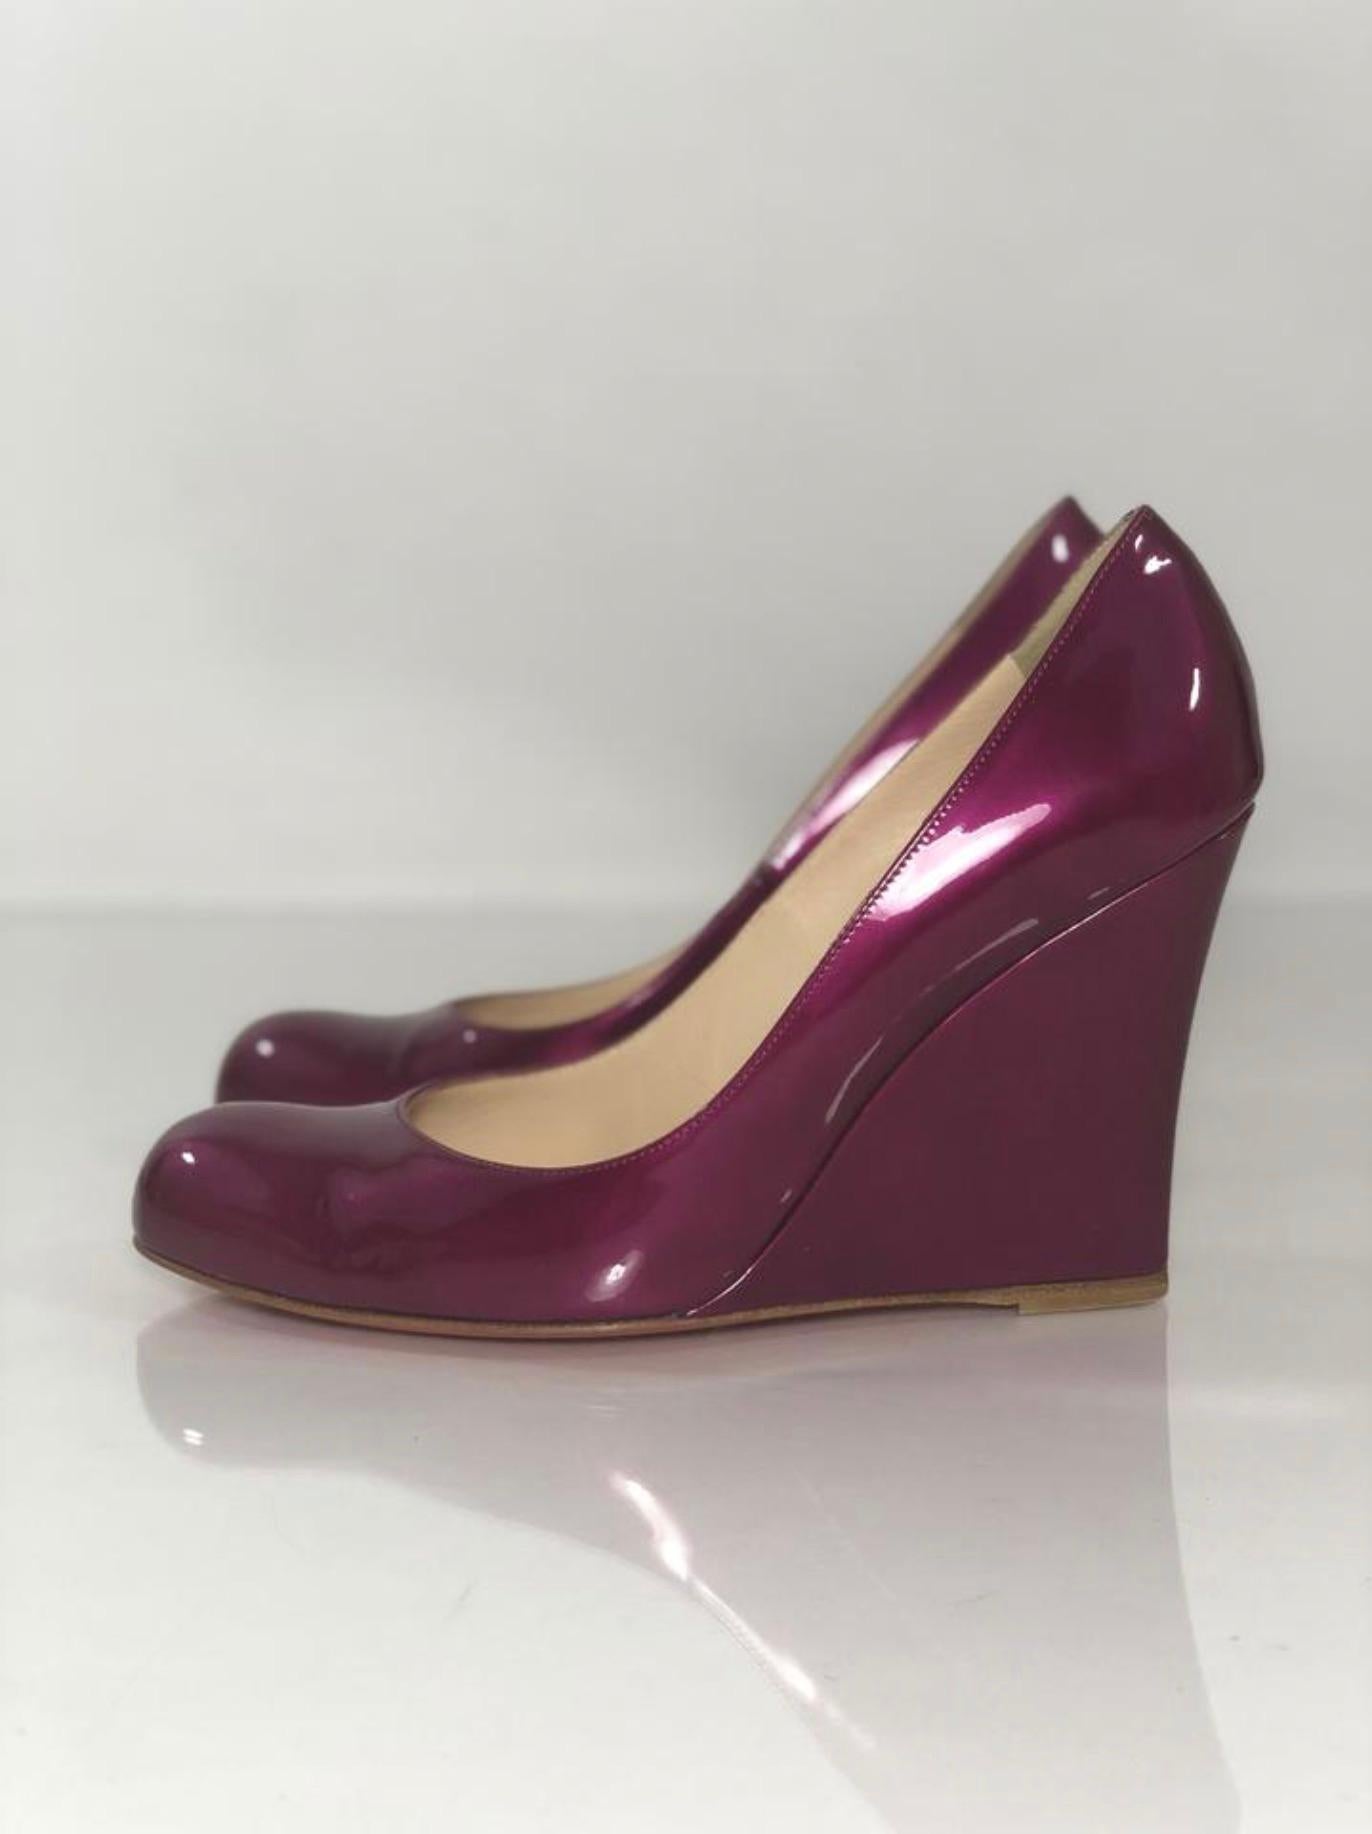 Christian Louboutin Balinodono Flat Patent Wedge in Bright Pink In Good Condition For Sale In Saint Charles, IL